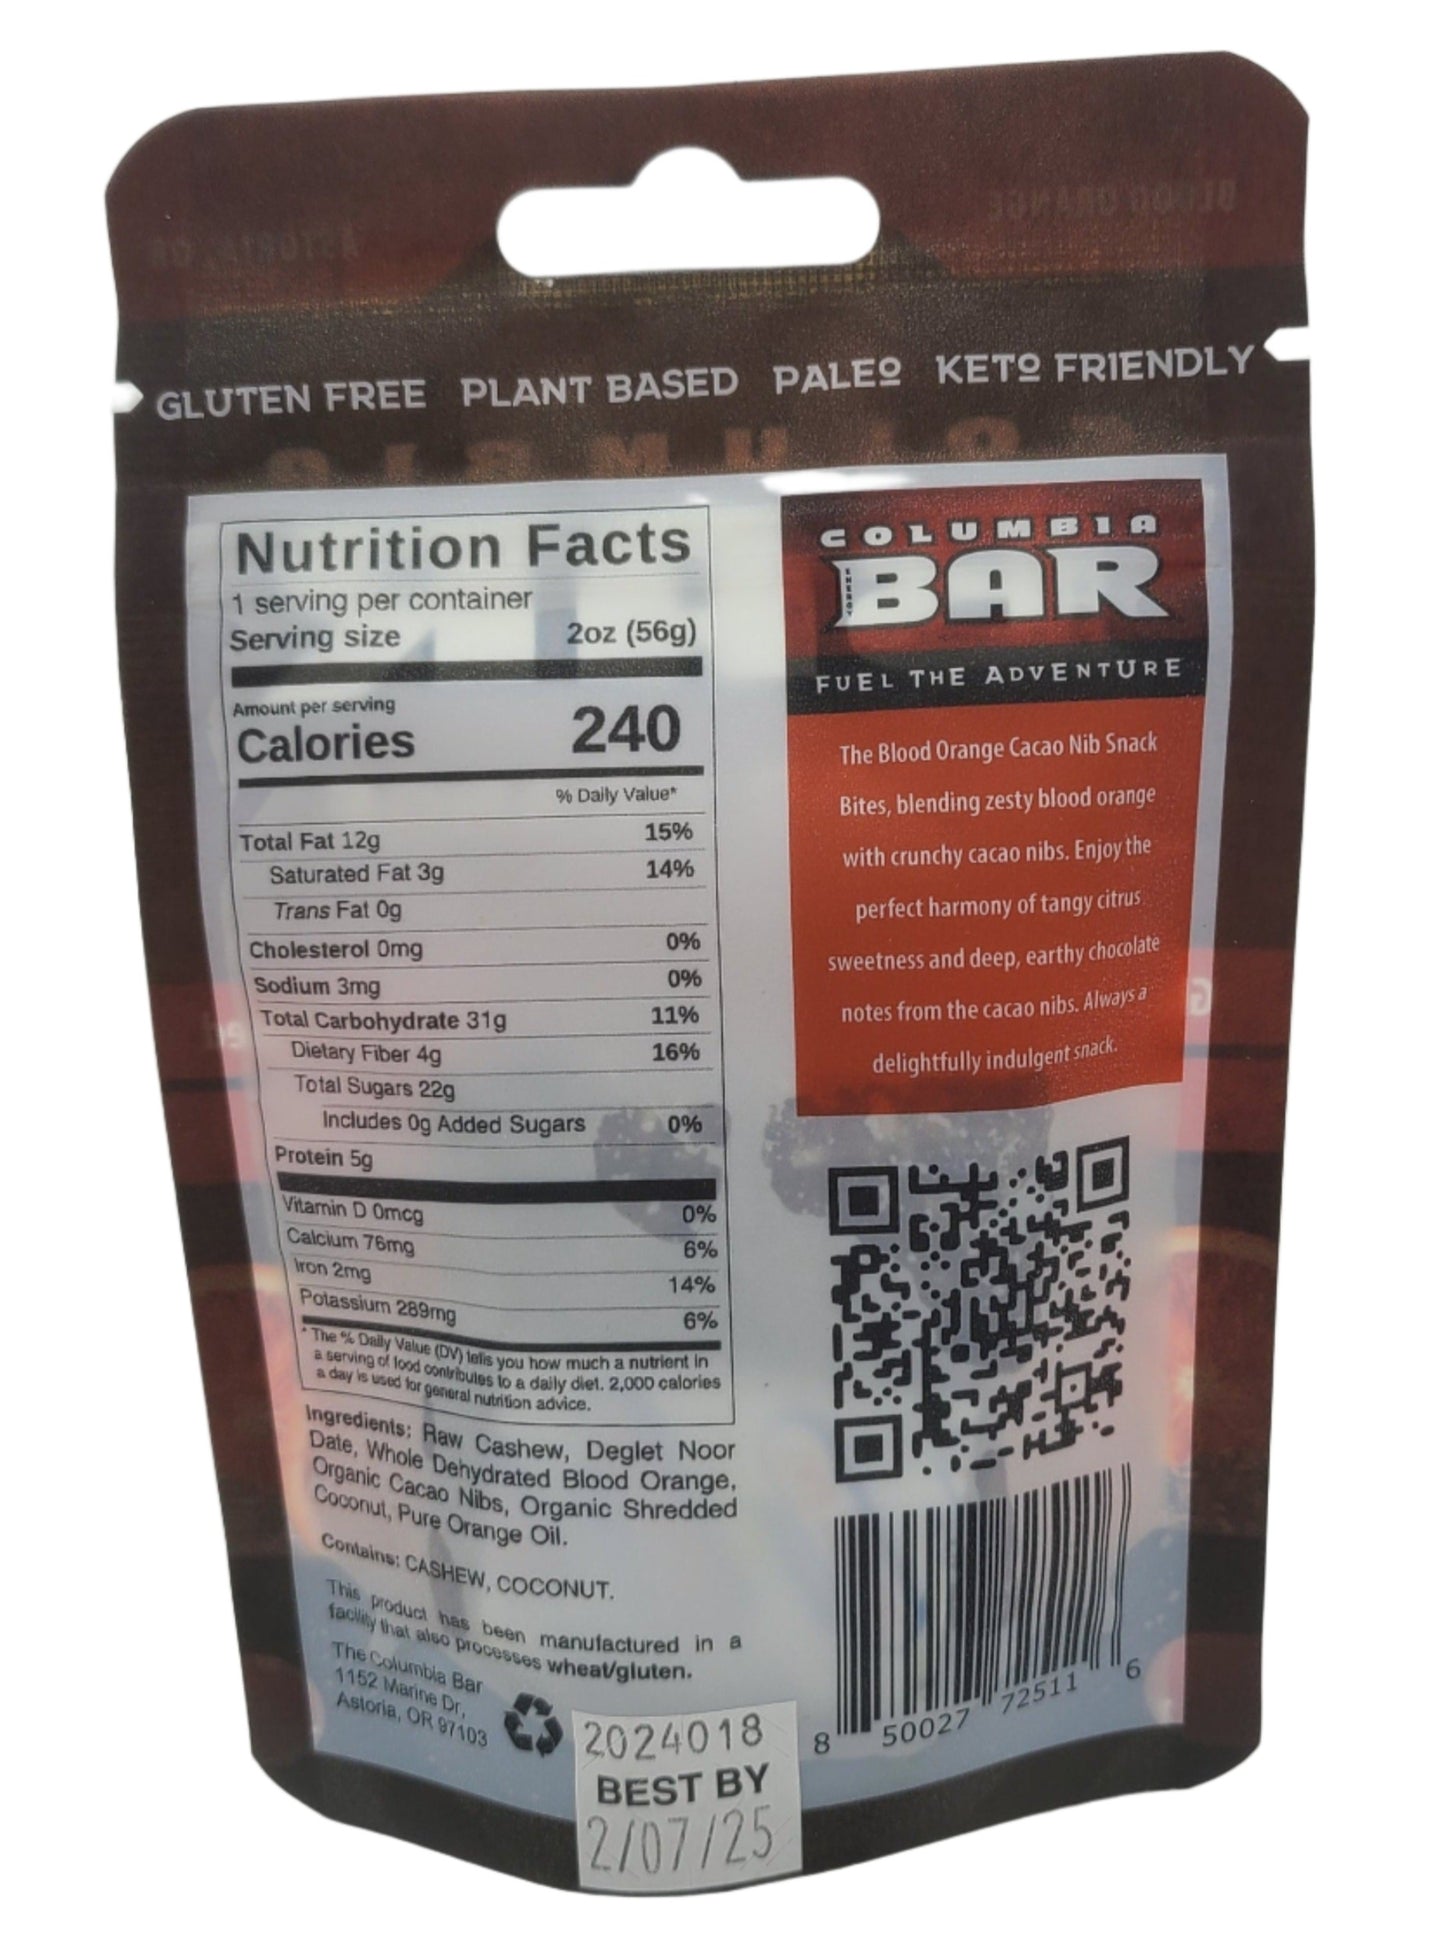 Nutritional Facts and QR with brief description of product